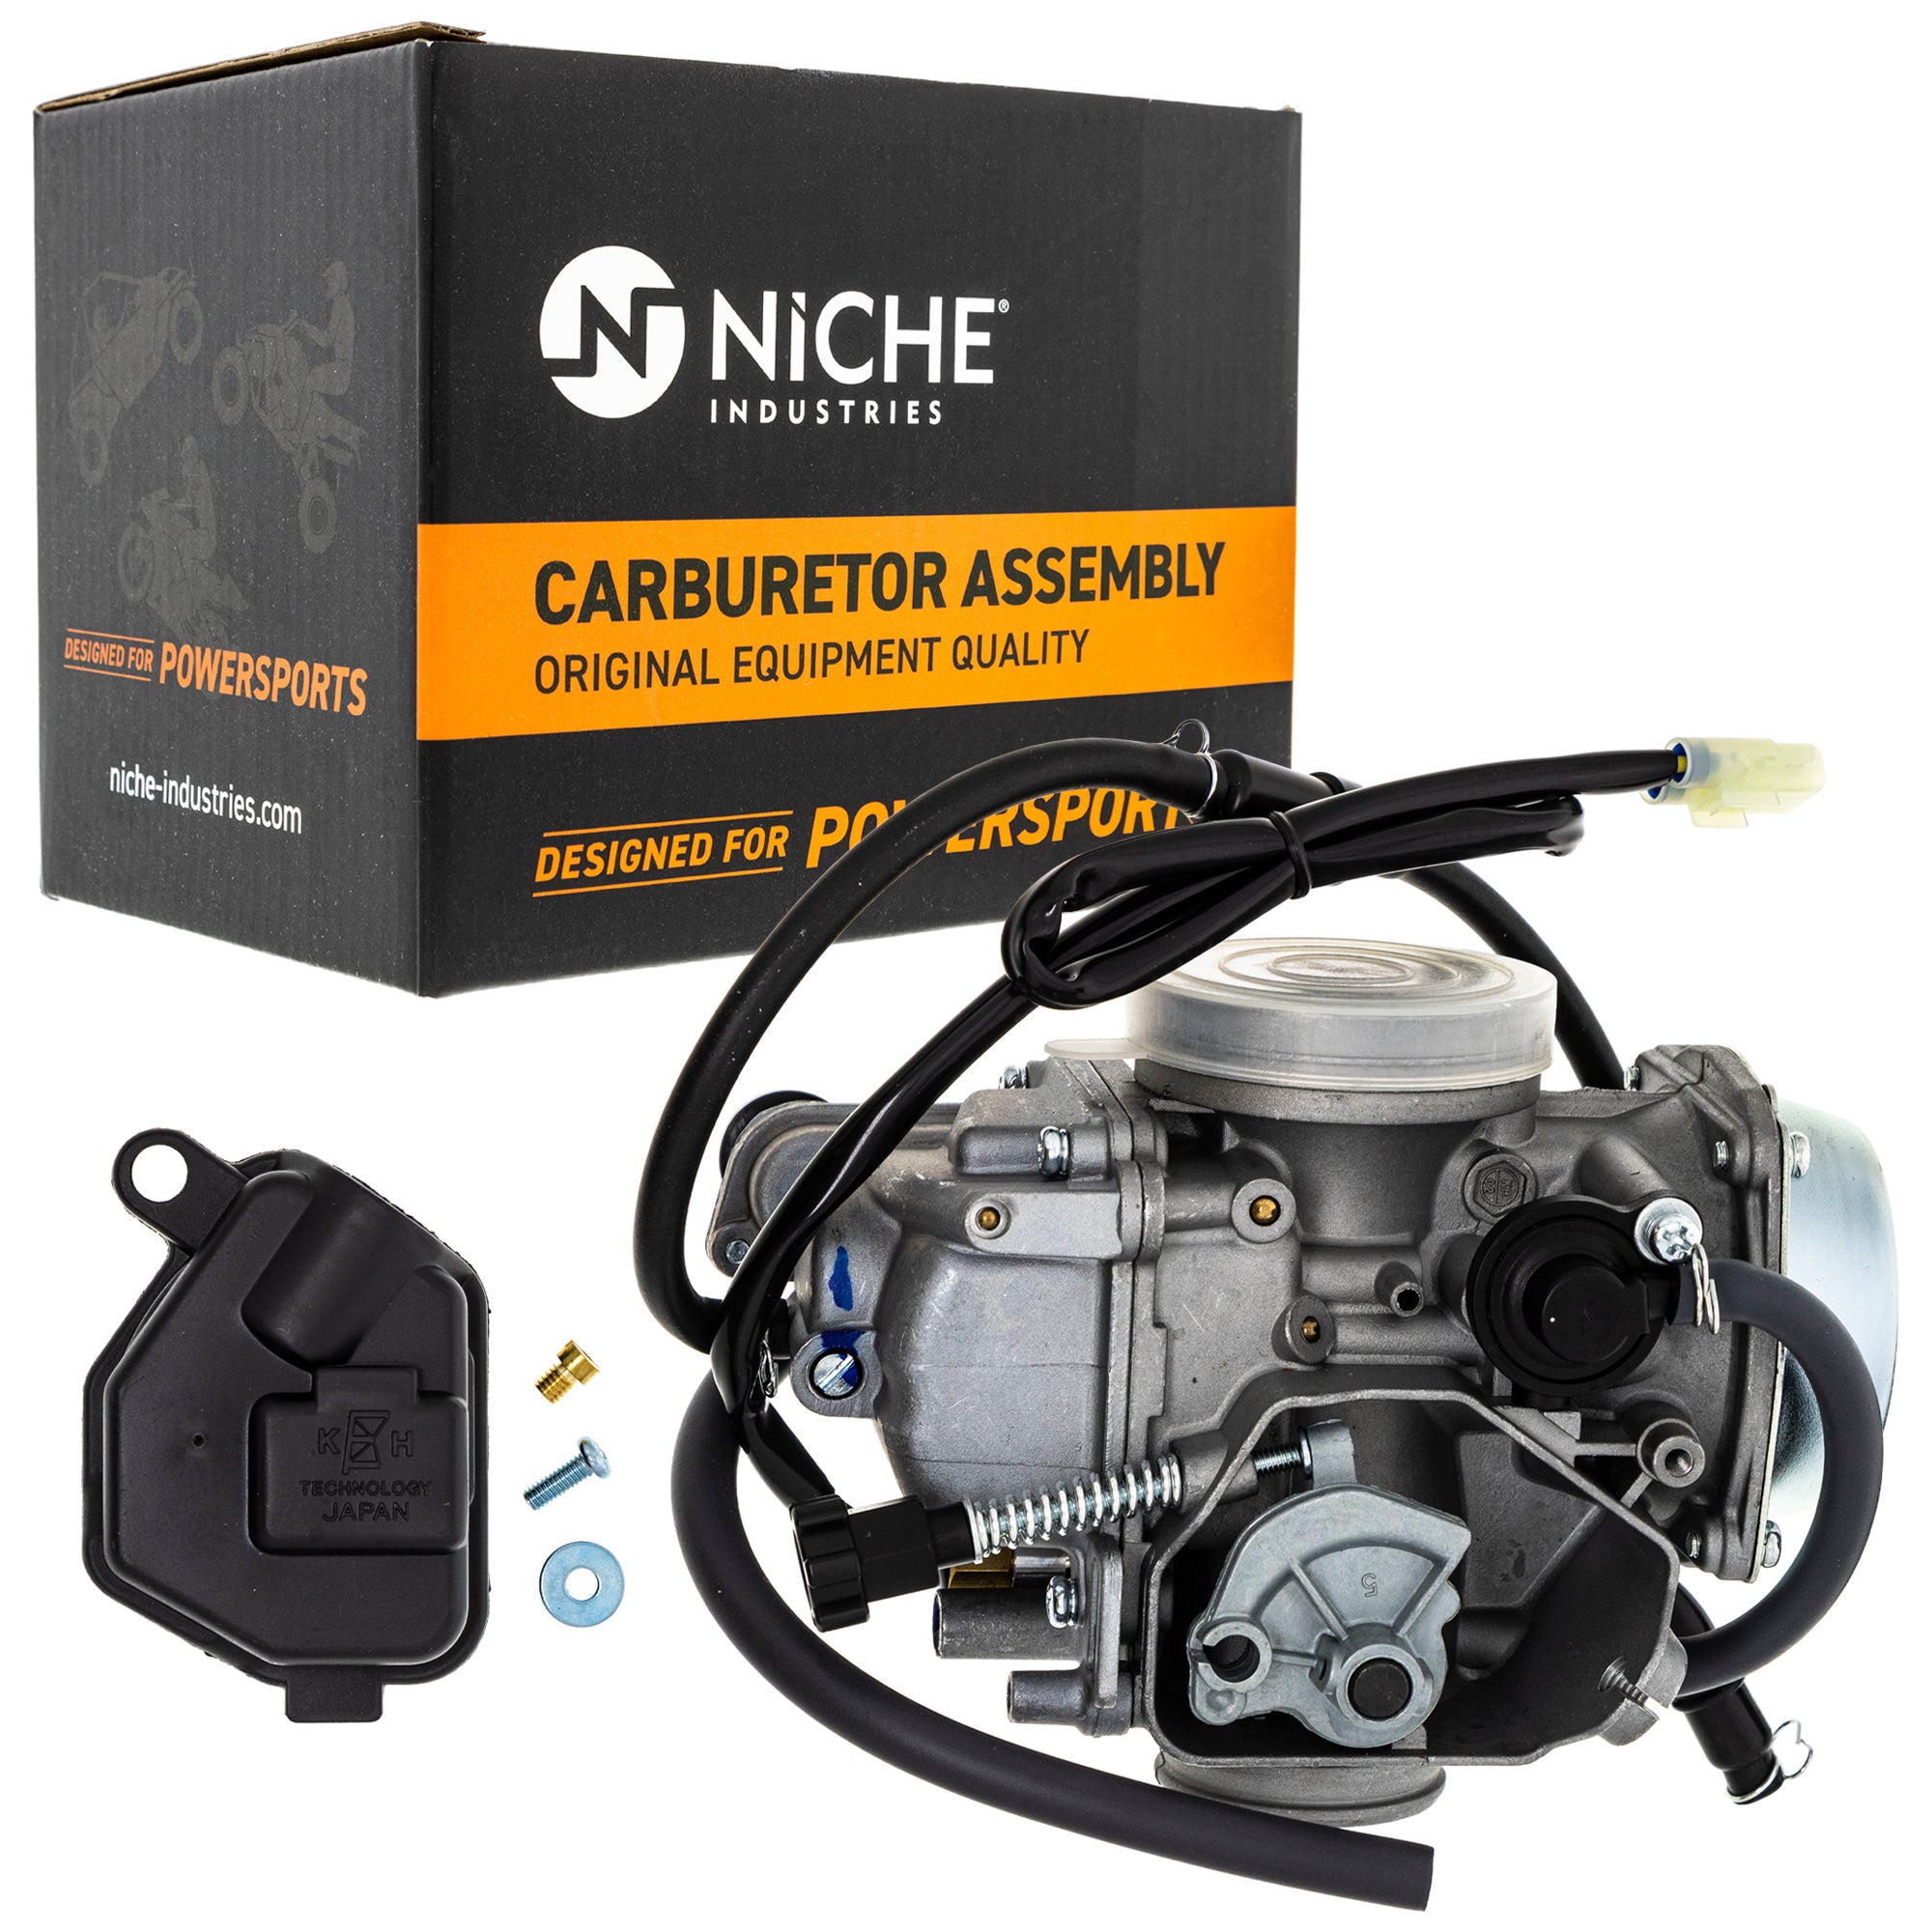 NICHE 519-KCR2234B Carburetor Assembly for zOTHER Foreman